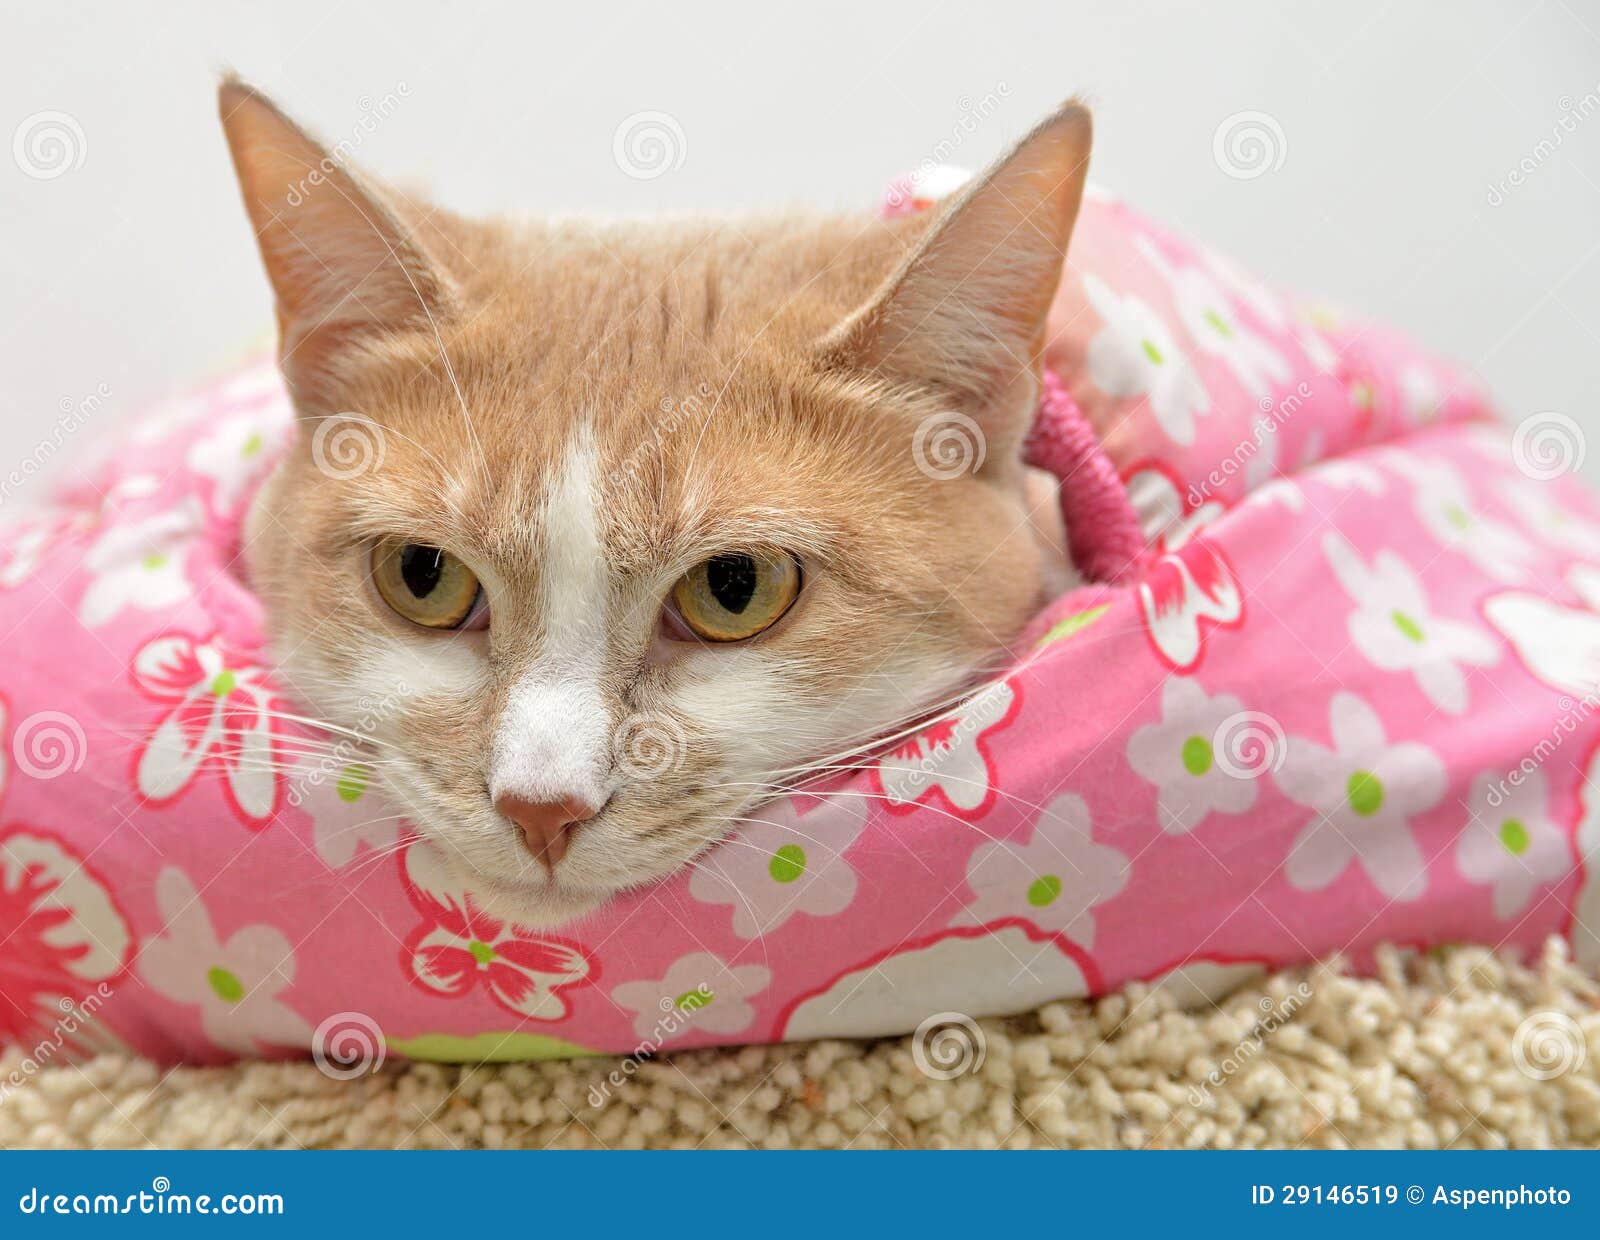  Cute cat laying down  stock image Image of shorthair 